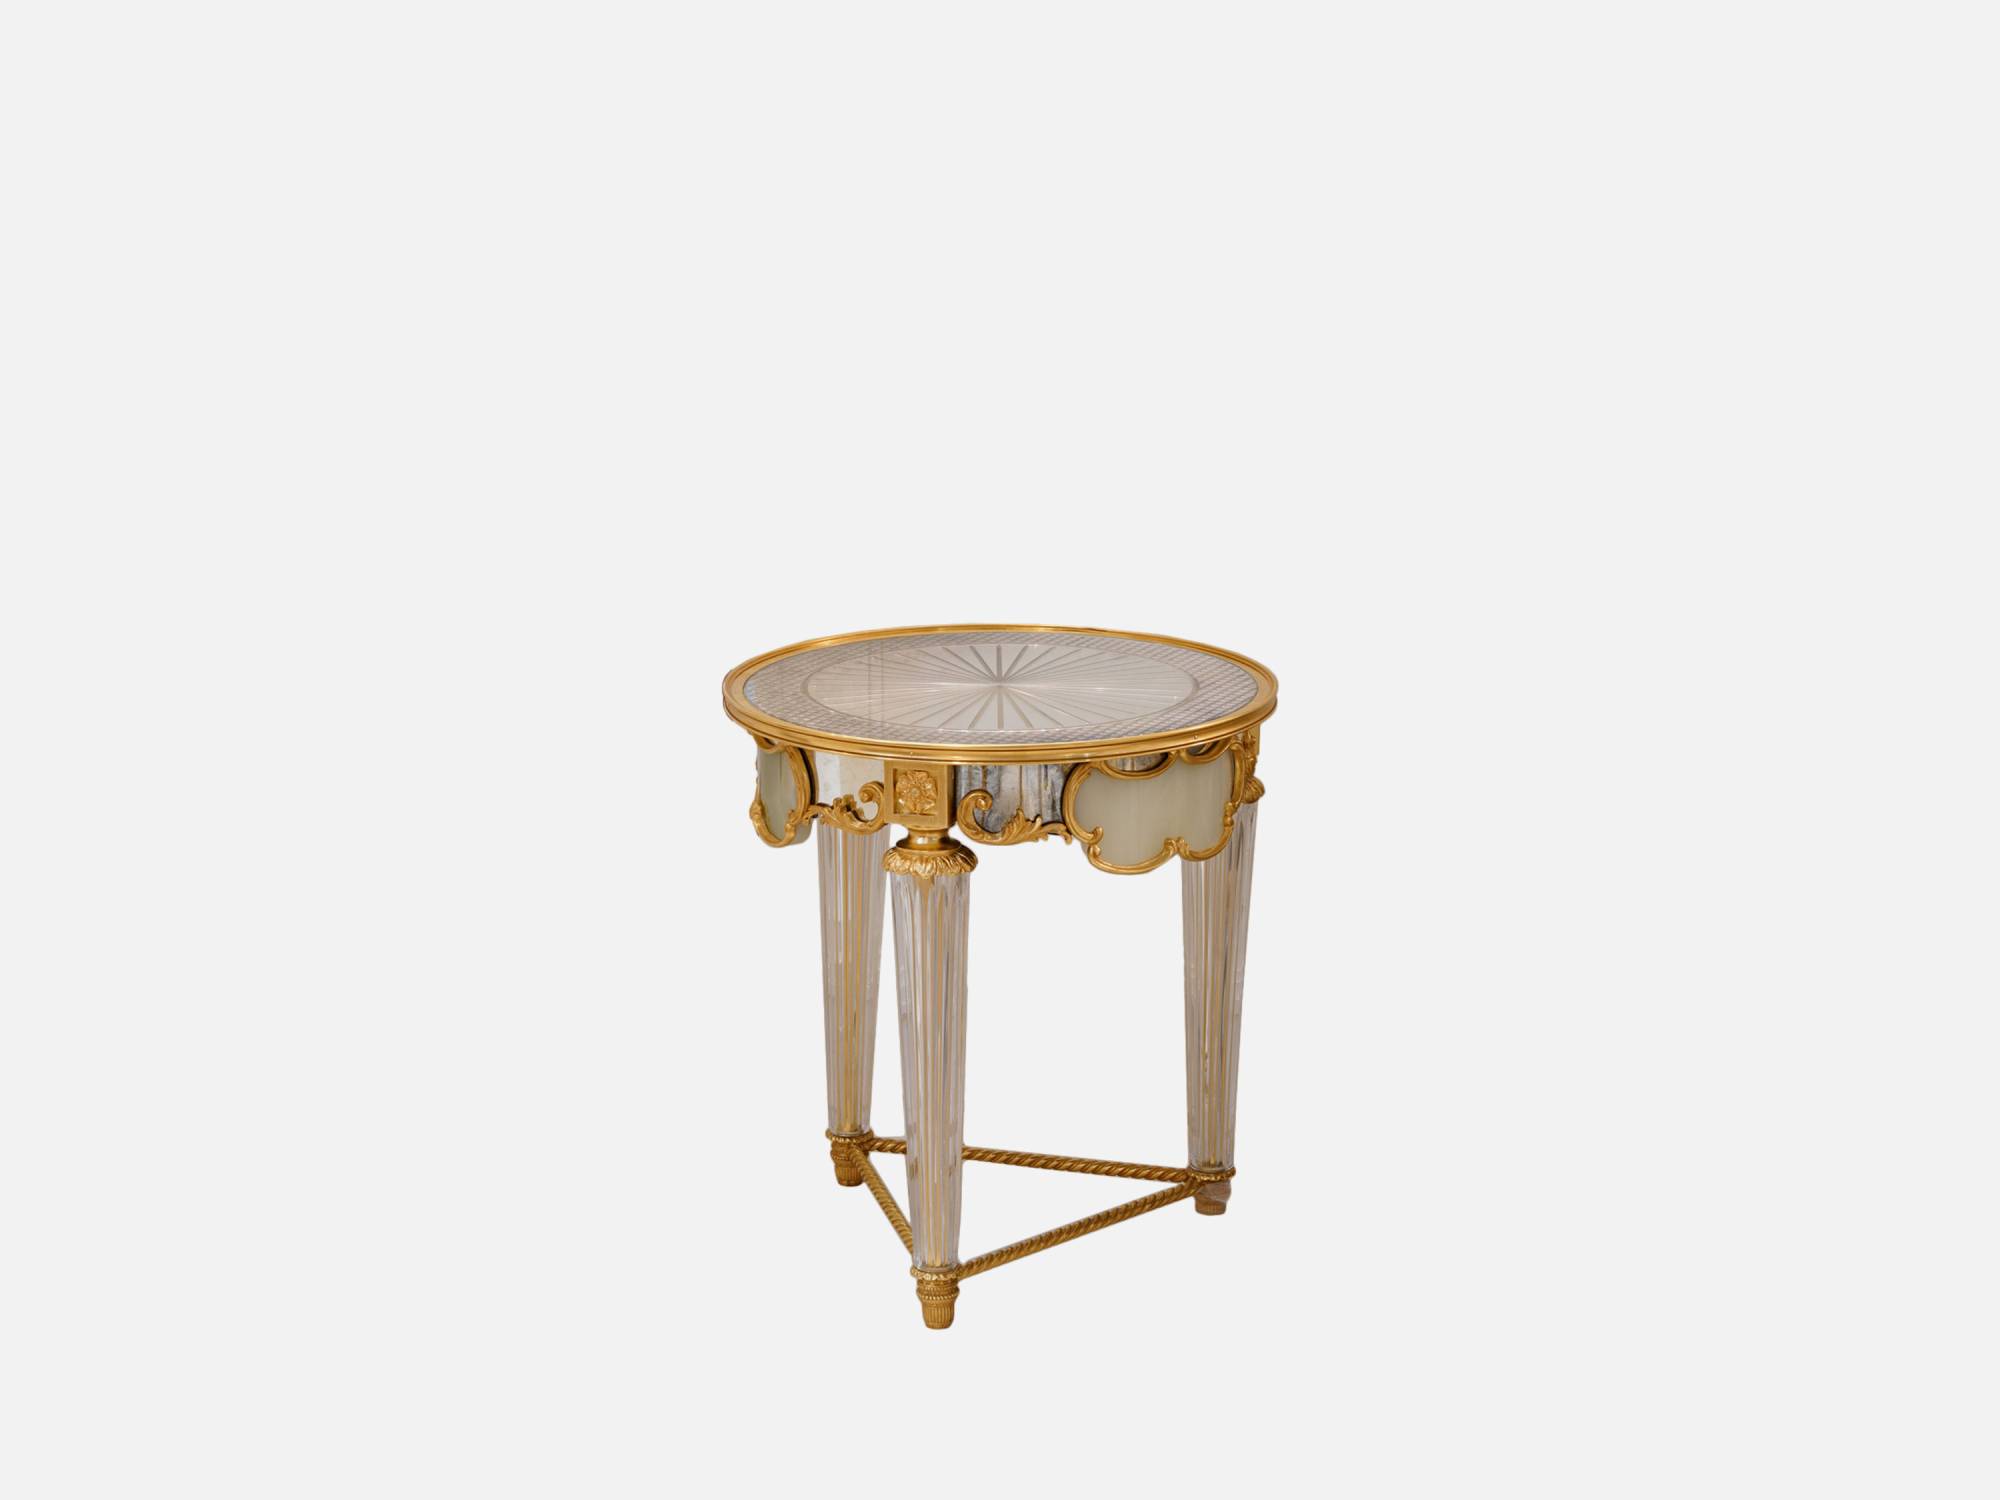 ART. 2193 – The elegance of luxury classic Small tables made in Italy by C.G. Capelletti.